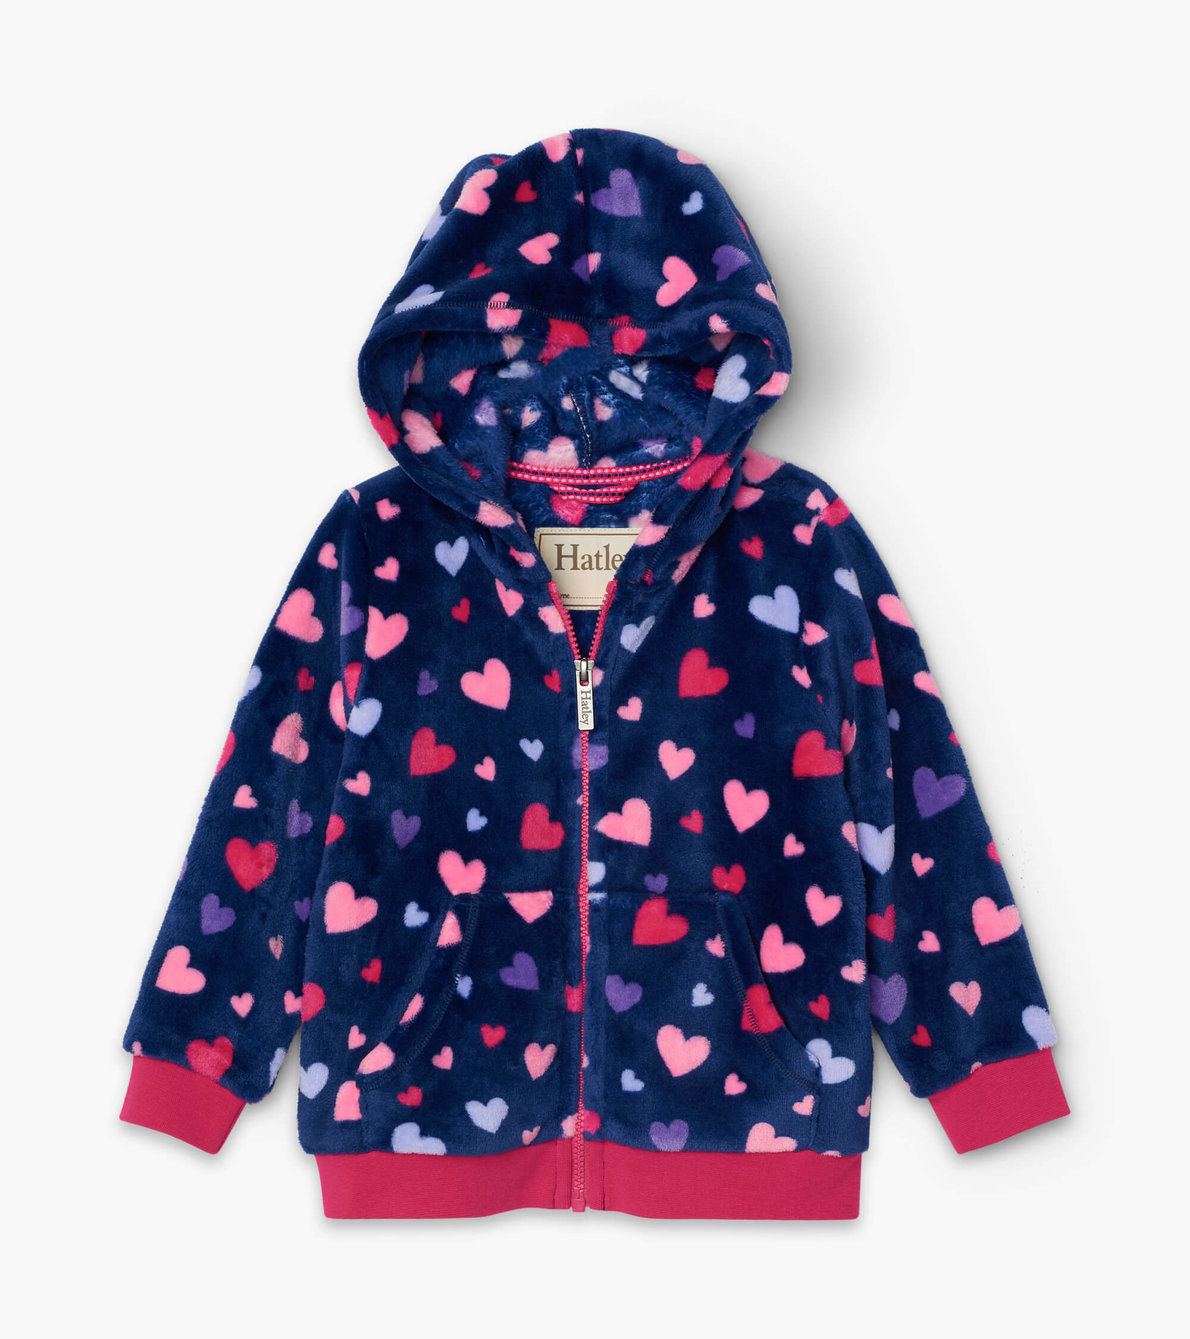 View larger image of Confetti Hearts Fuzzy Fleece Hooded Jacket